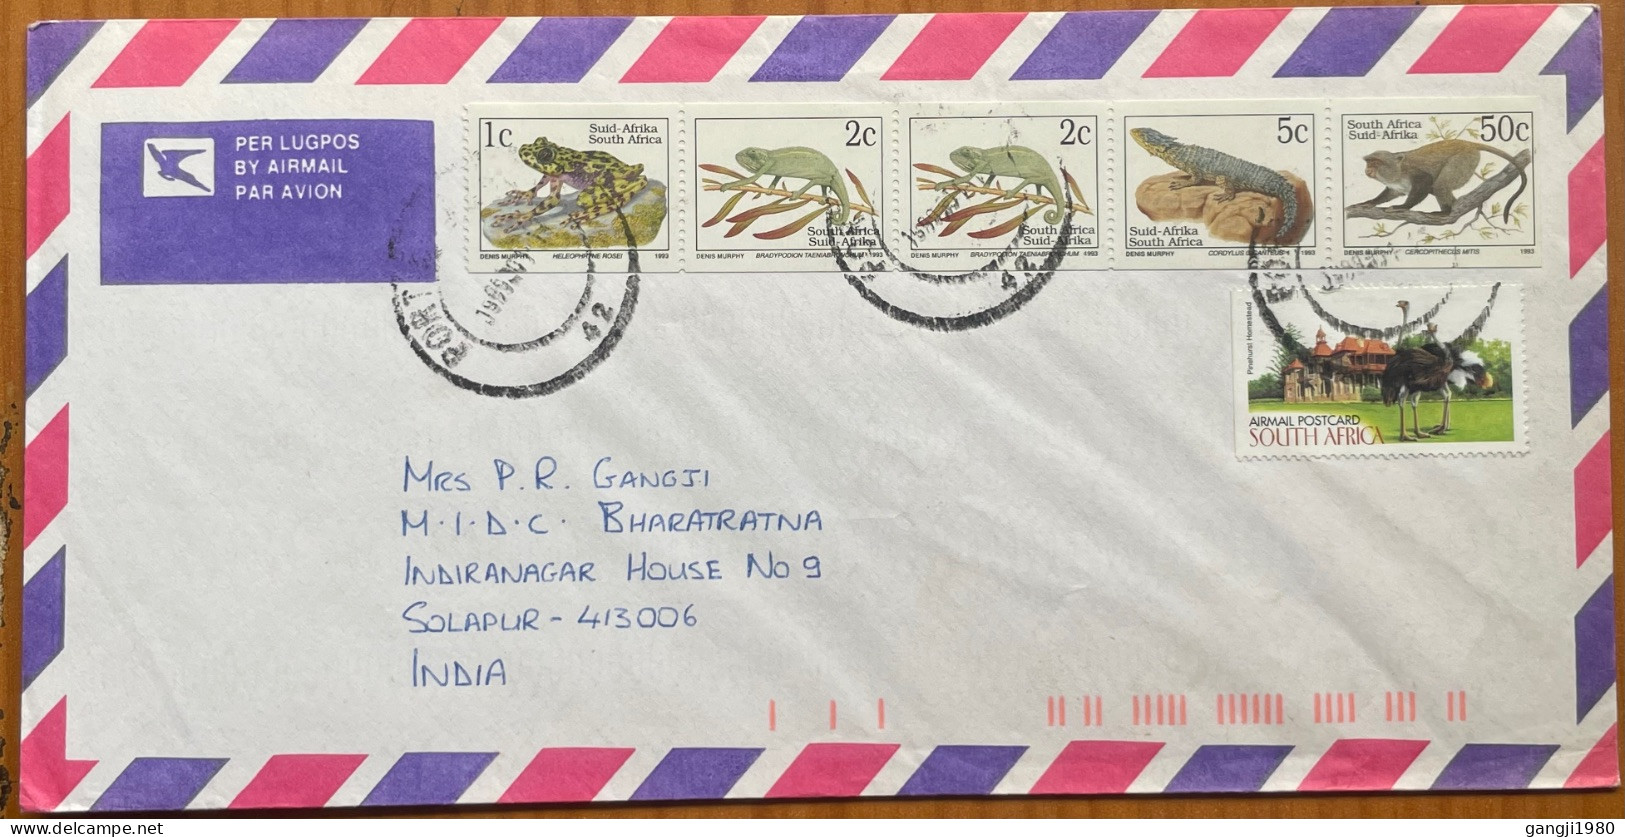 SOUTH AFRICA 1993, COVER USED TO INDIA, BOOKLET PANE, REPTILE, MONKEY, ANIMAL, BIRD, BUILDING, 6 STAMP, PORT ELIZABETH - Cartas & Documentos